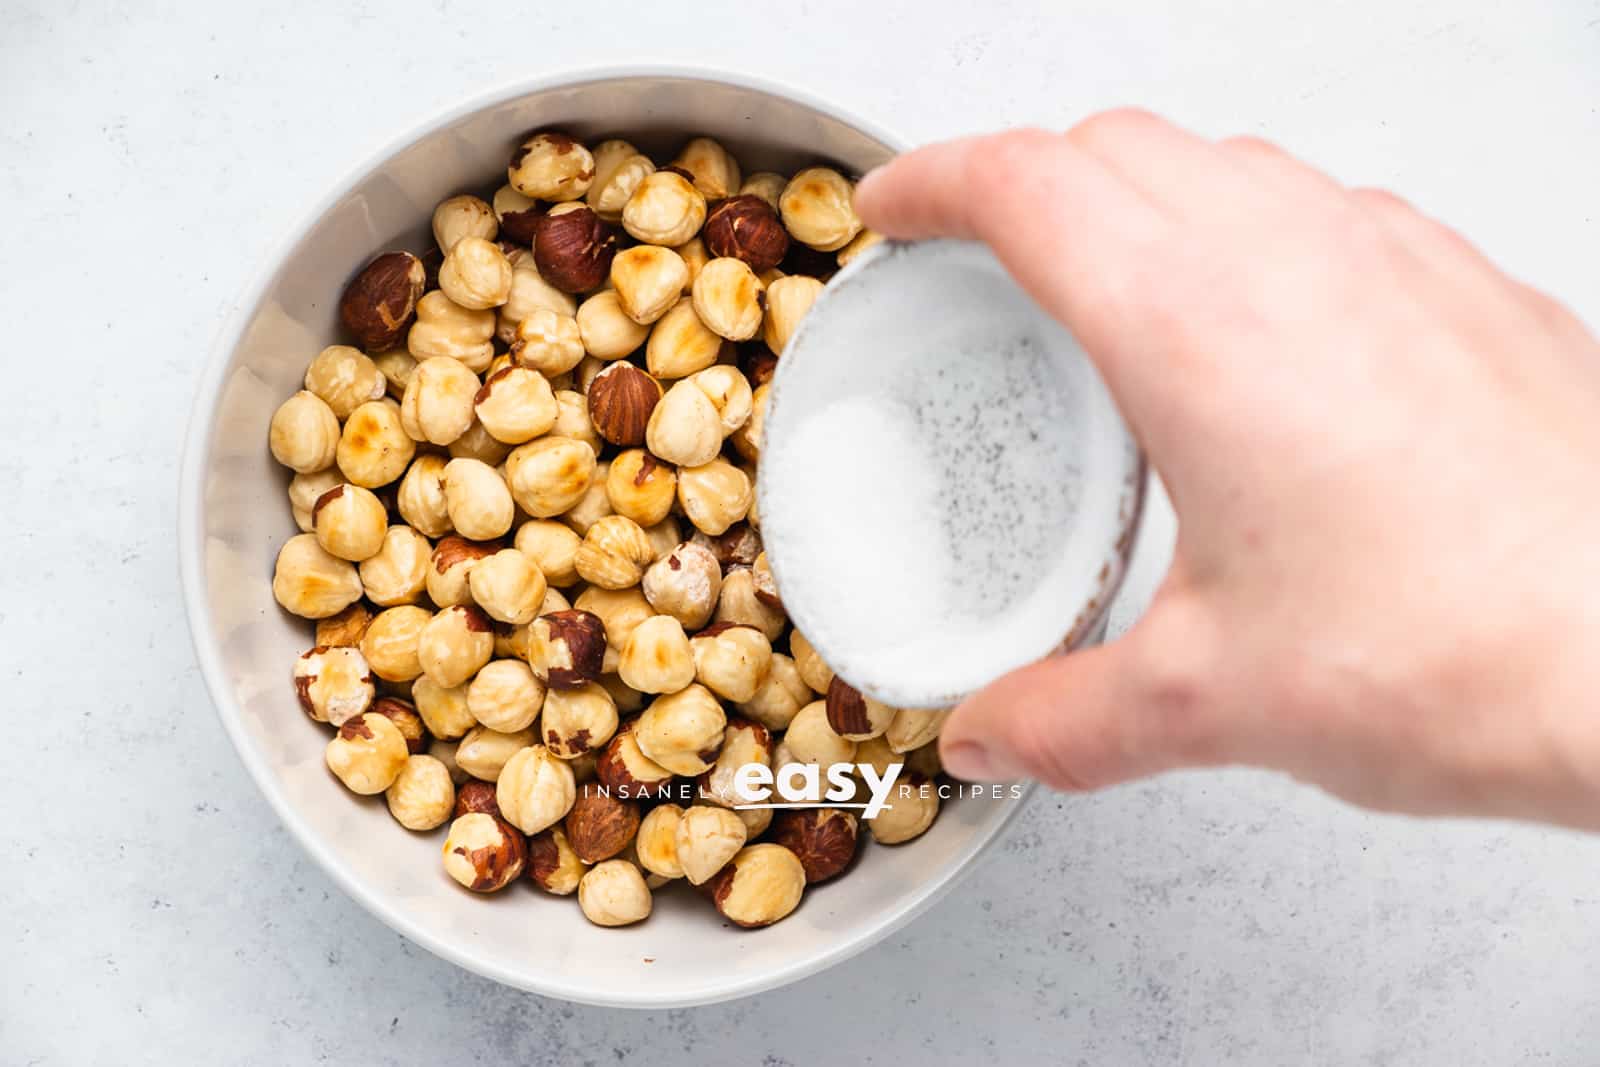 Top view photo of a hand sprinkling sauce into a bowl of peeled and roasted hazelnuts.